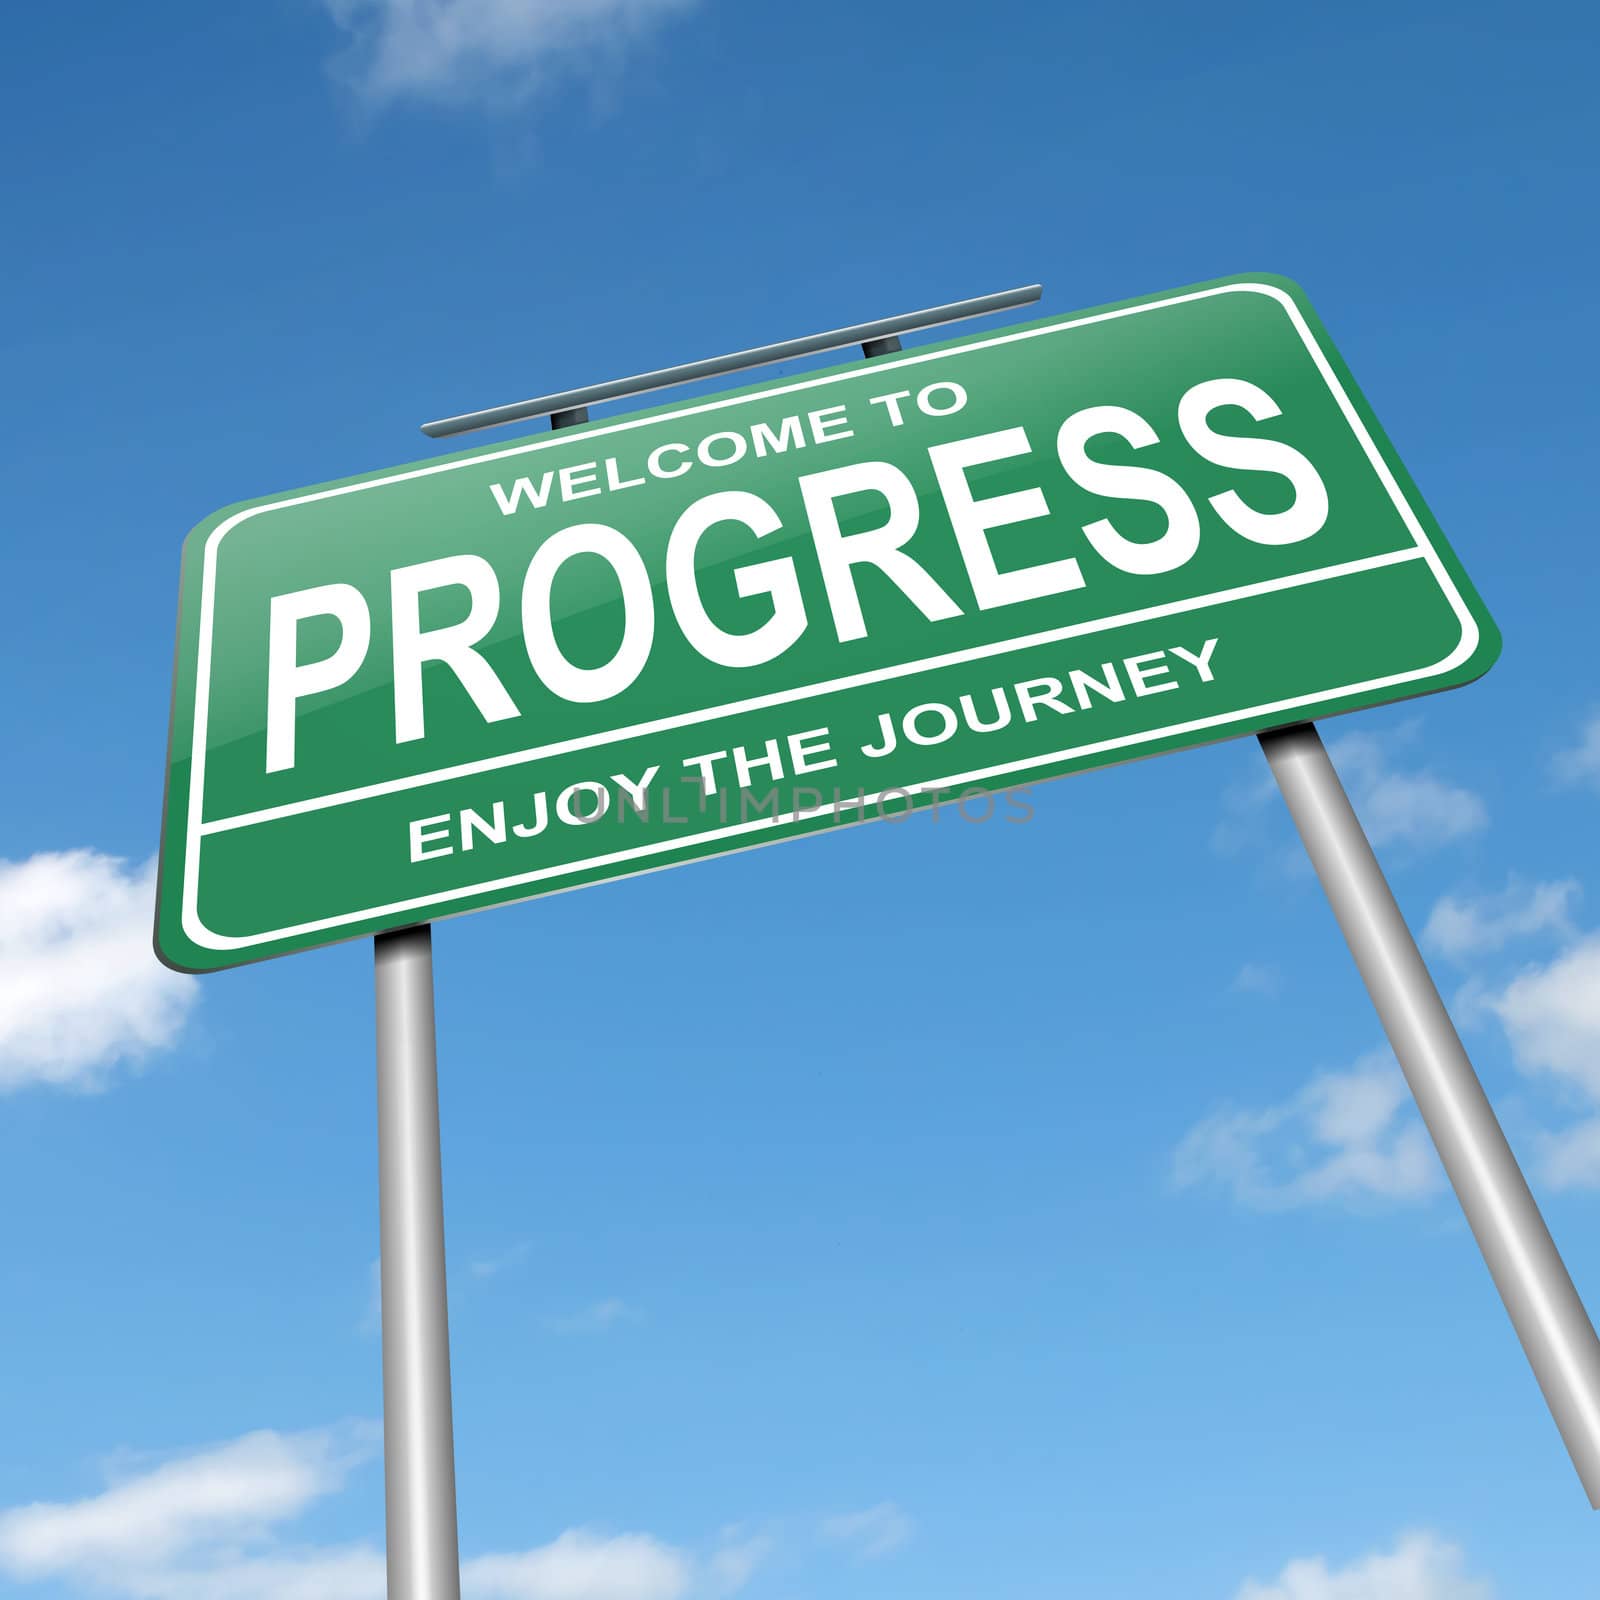 Illustration depicting a green roadsign with a progress concept. Blue sky background.